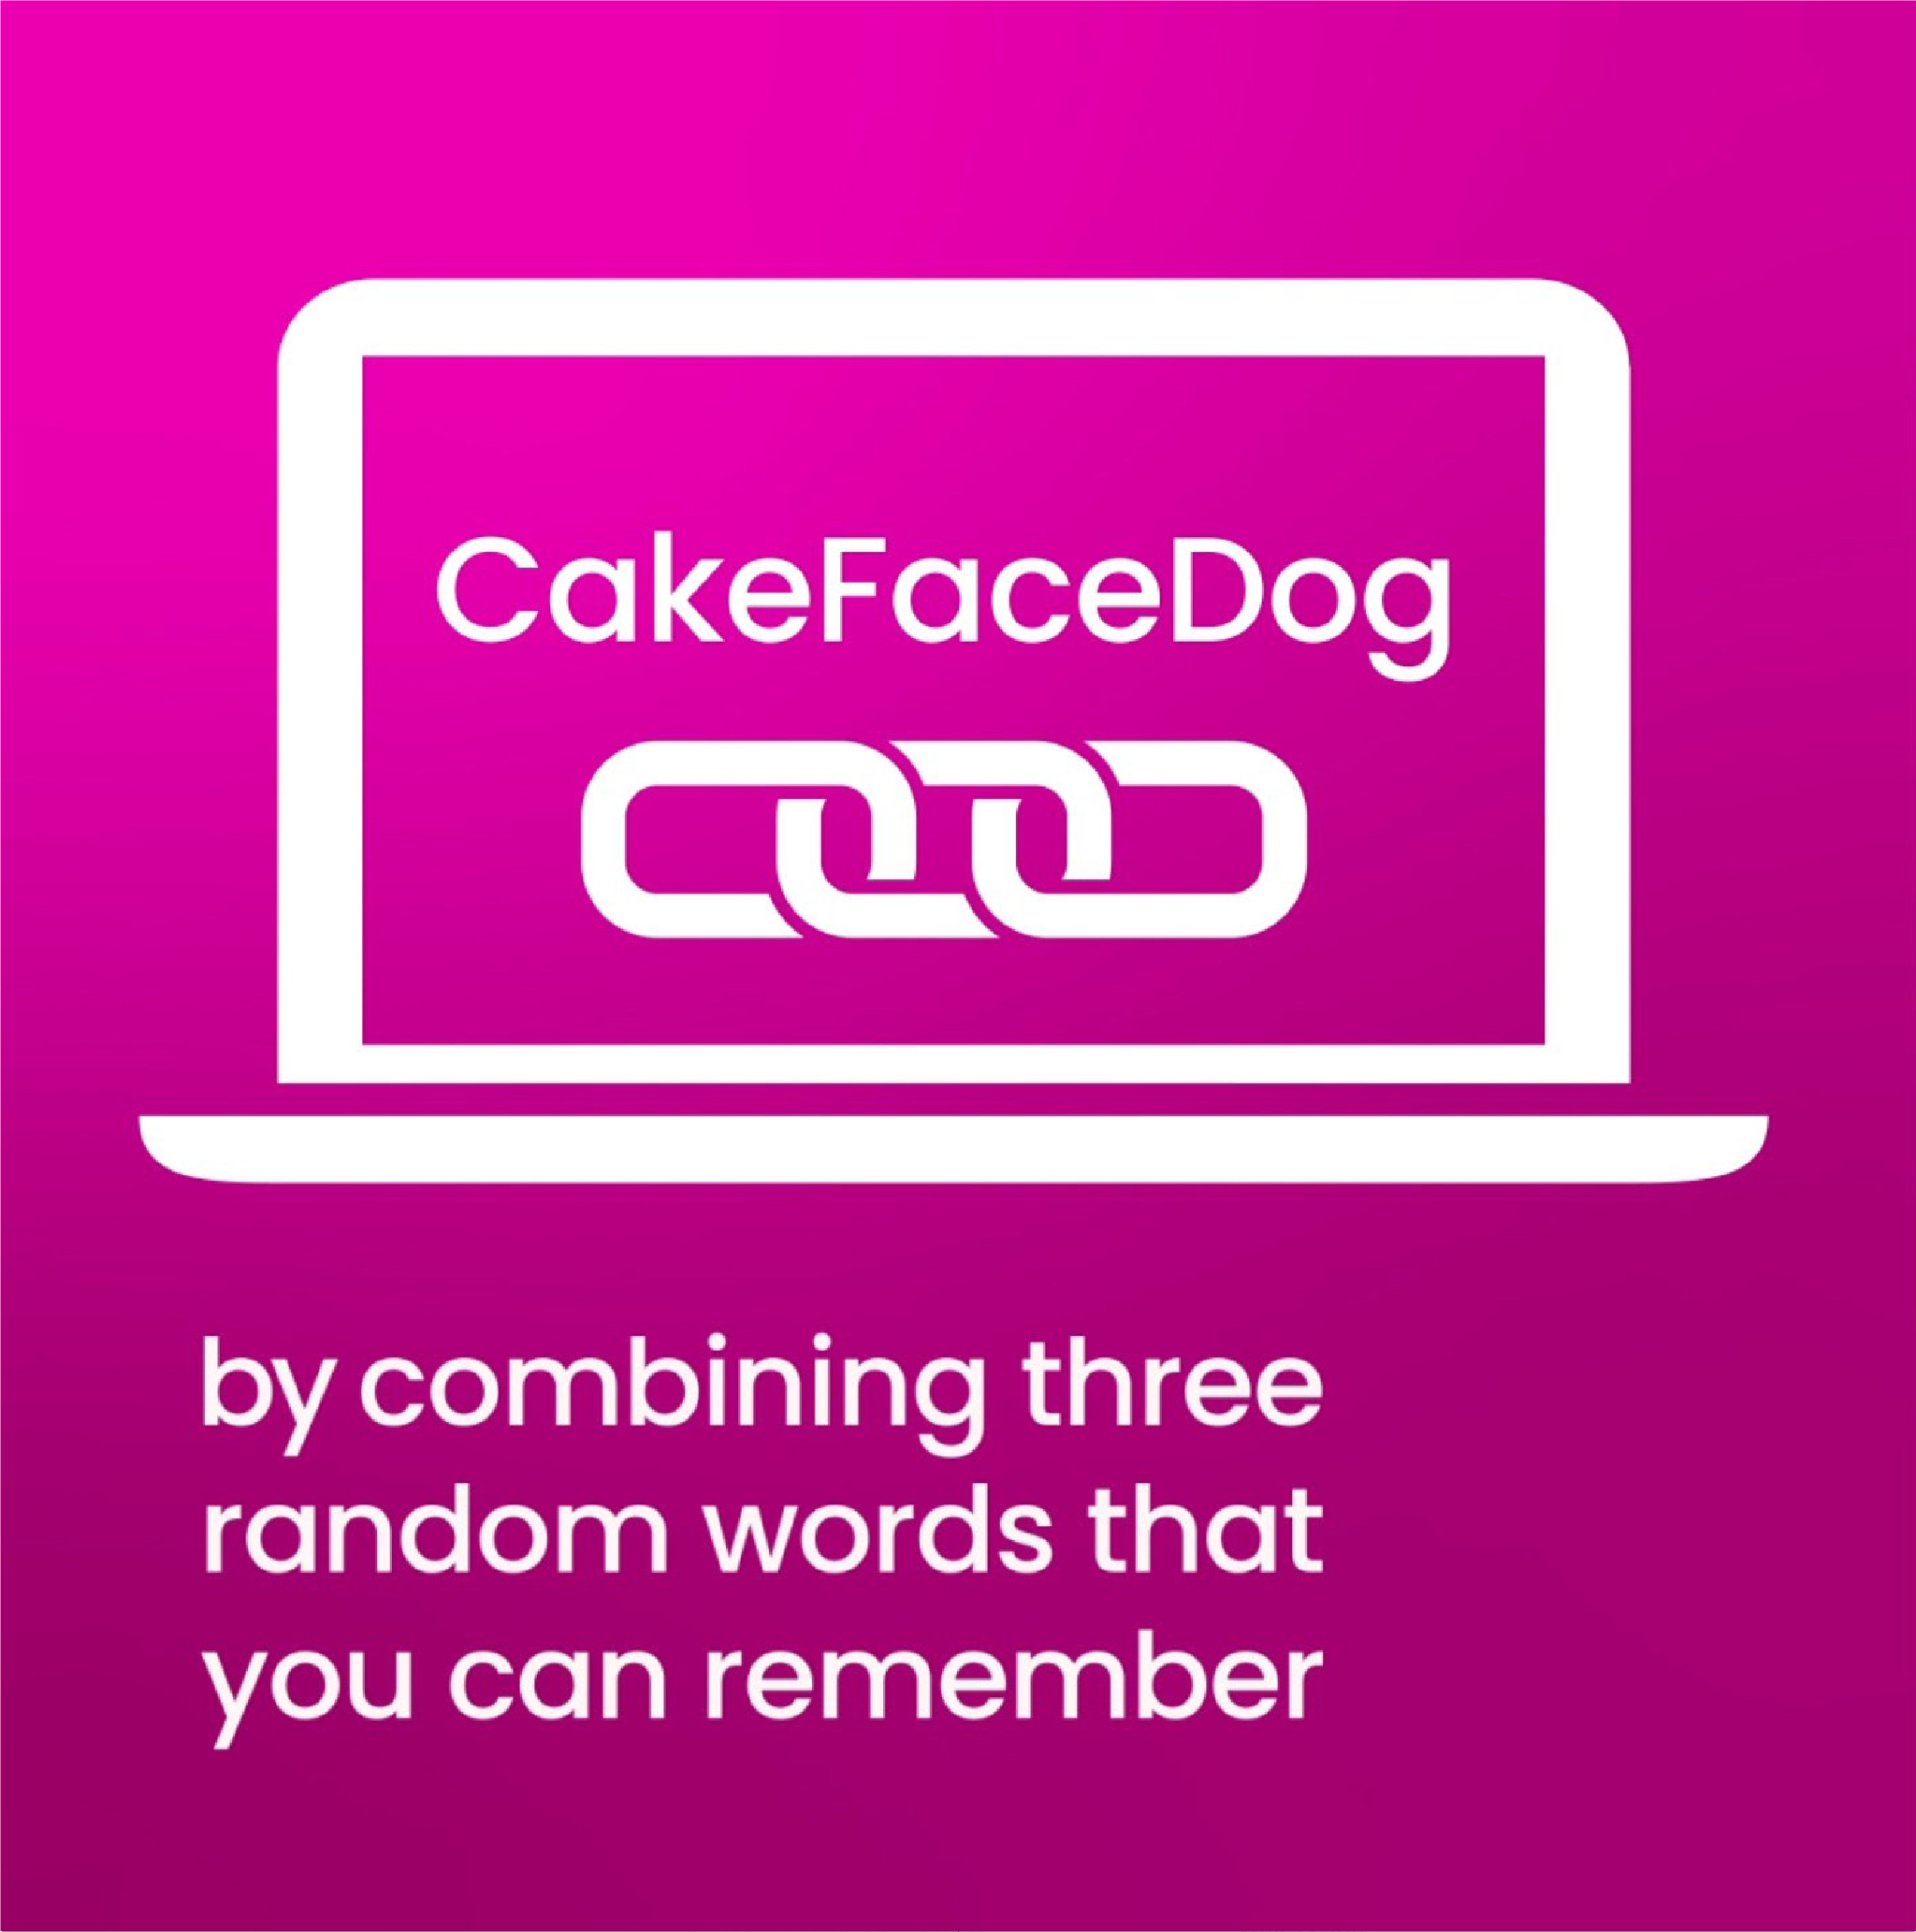 Keep passwords strong by combined 3 random words that you remember